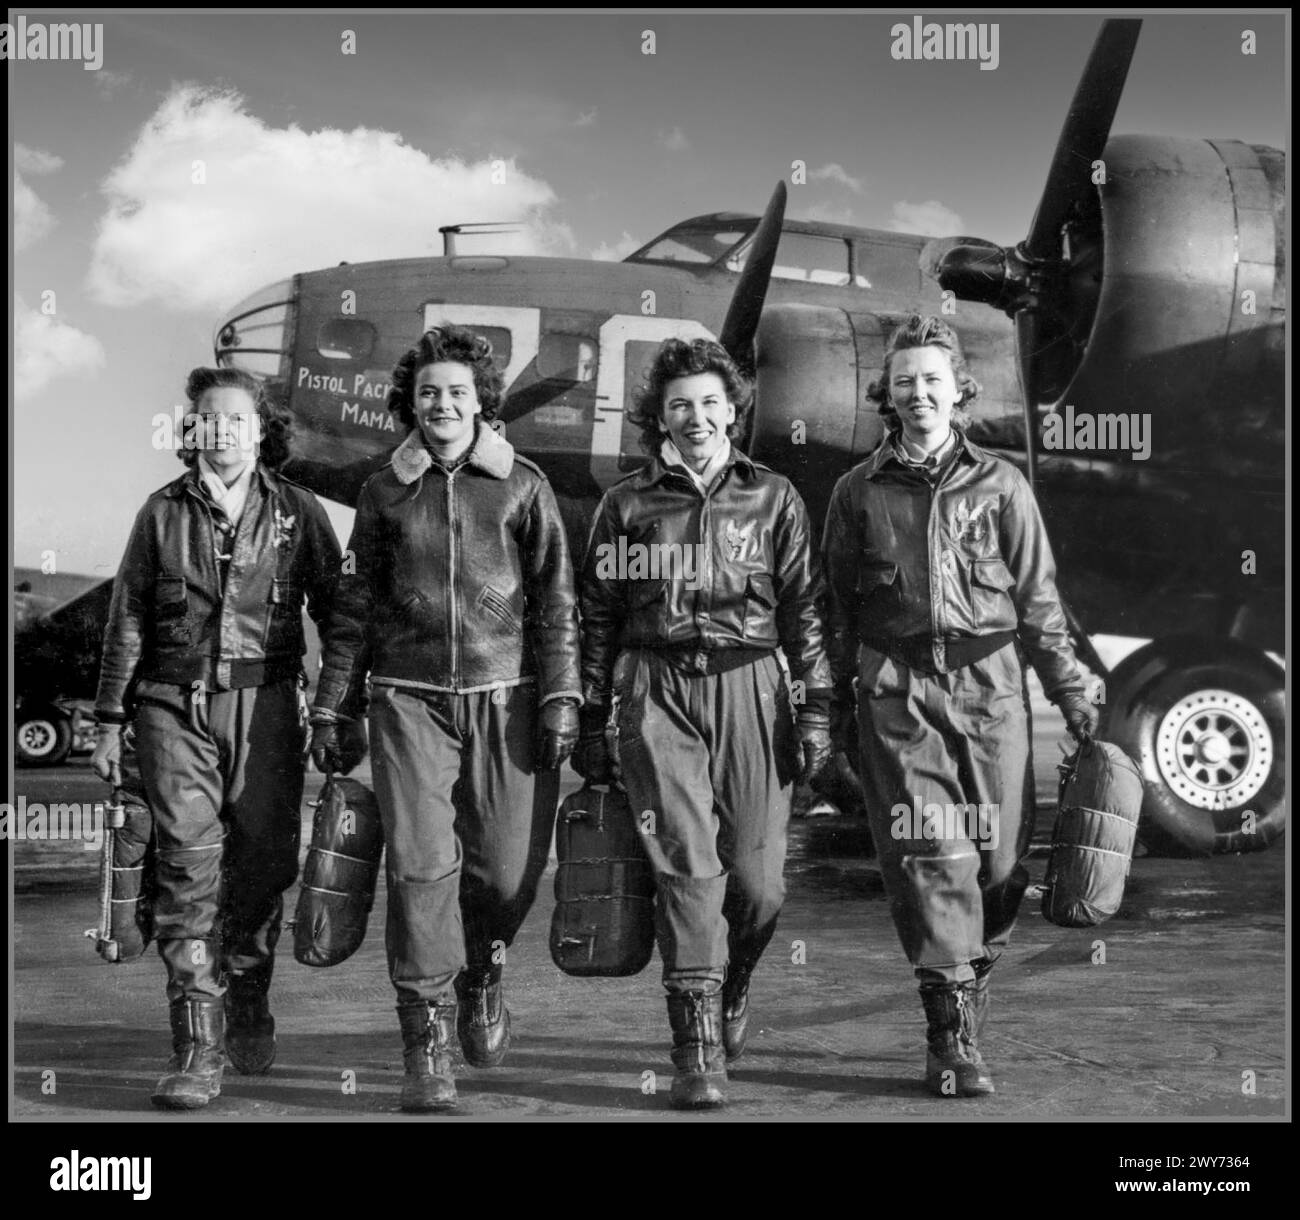 WW2 1944 American WASP (Women Airforce Service Pilots) pilots in front of their B-17 bomber named Pistol Packin’ Mama. They have parachutes in their hands. These girls are cadets at a flight school in Lockbourne, Ohio, where they are being trained to fly B-17s. From left to right: Frances Green, Margaret (Peg) Kirchner, Ann Waldner and Blanche Osborn. WASP Pilots in front of USAAF B-17 'Pistol Packin Mama' Stock Photo